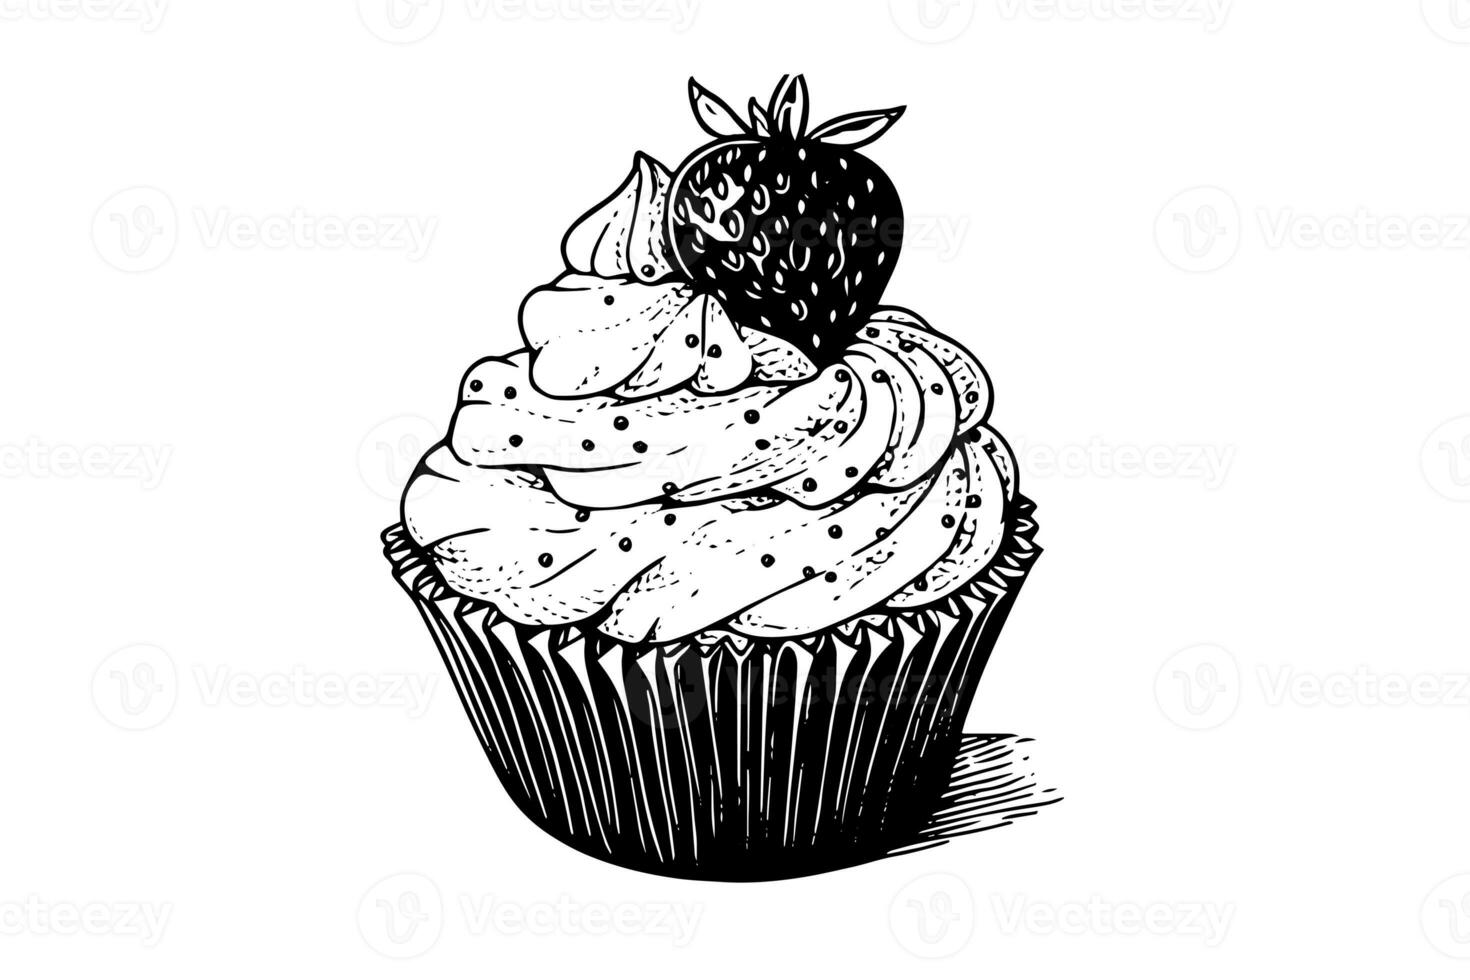 Cupcake with berries in engraving style. Ink sketch isolated on white background. Hand drawn vector illustration photo